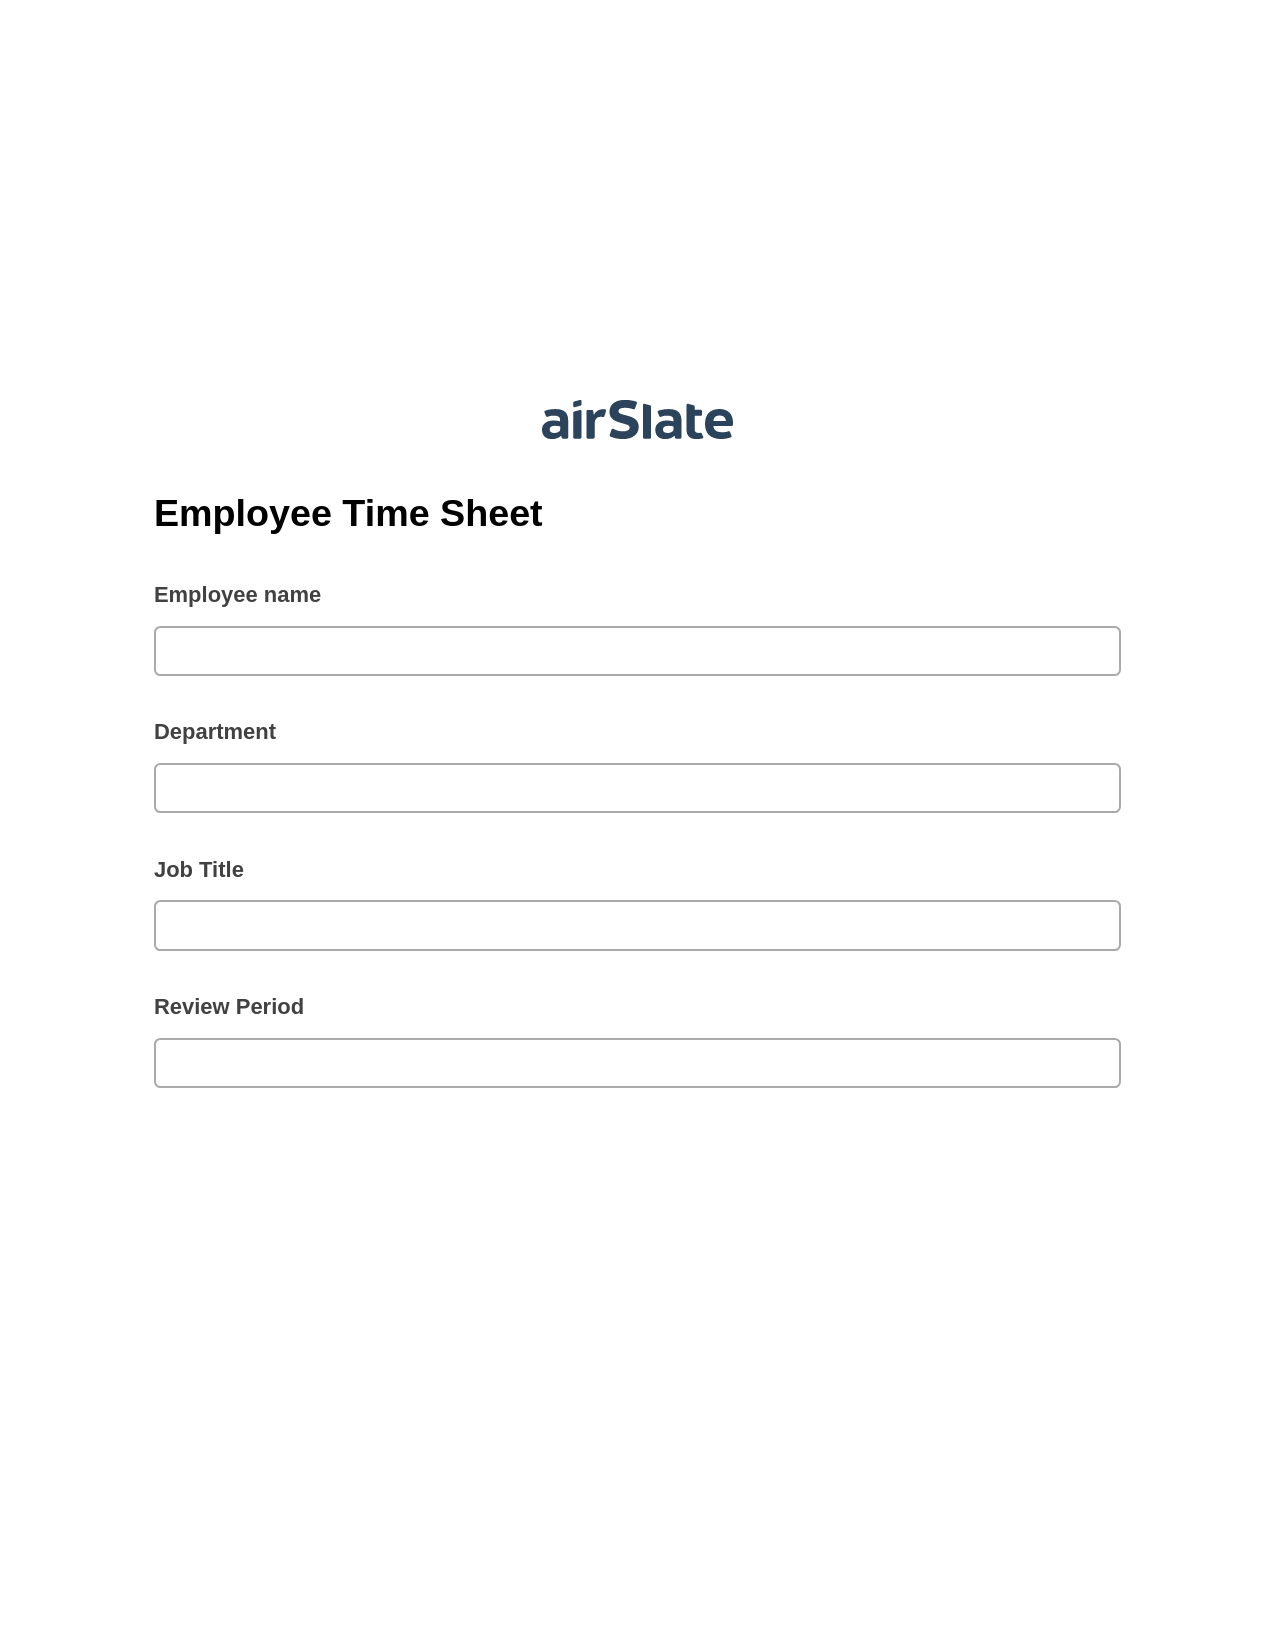 Multirole Employee Time Sheet Pre-fill from Salesforce Records with SOQL Bot, Update Audit Trail Bot, Webhook Postfinish Bot